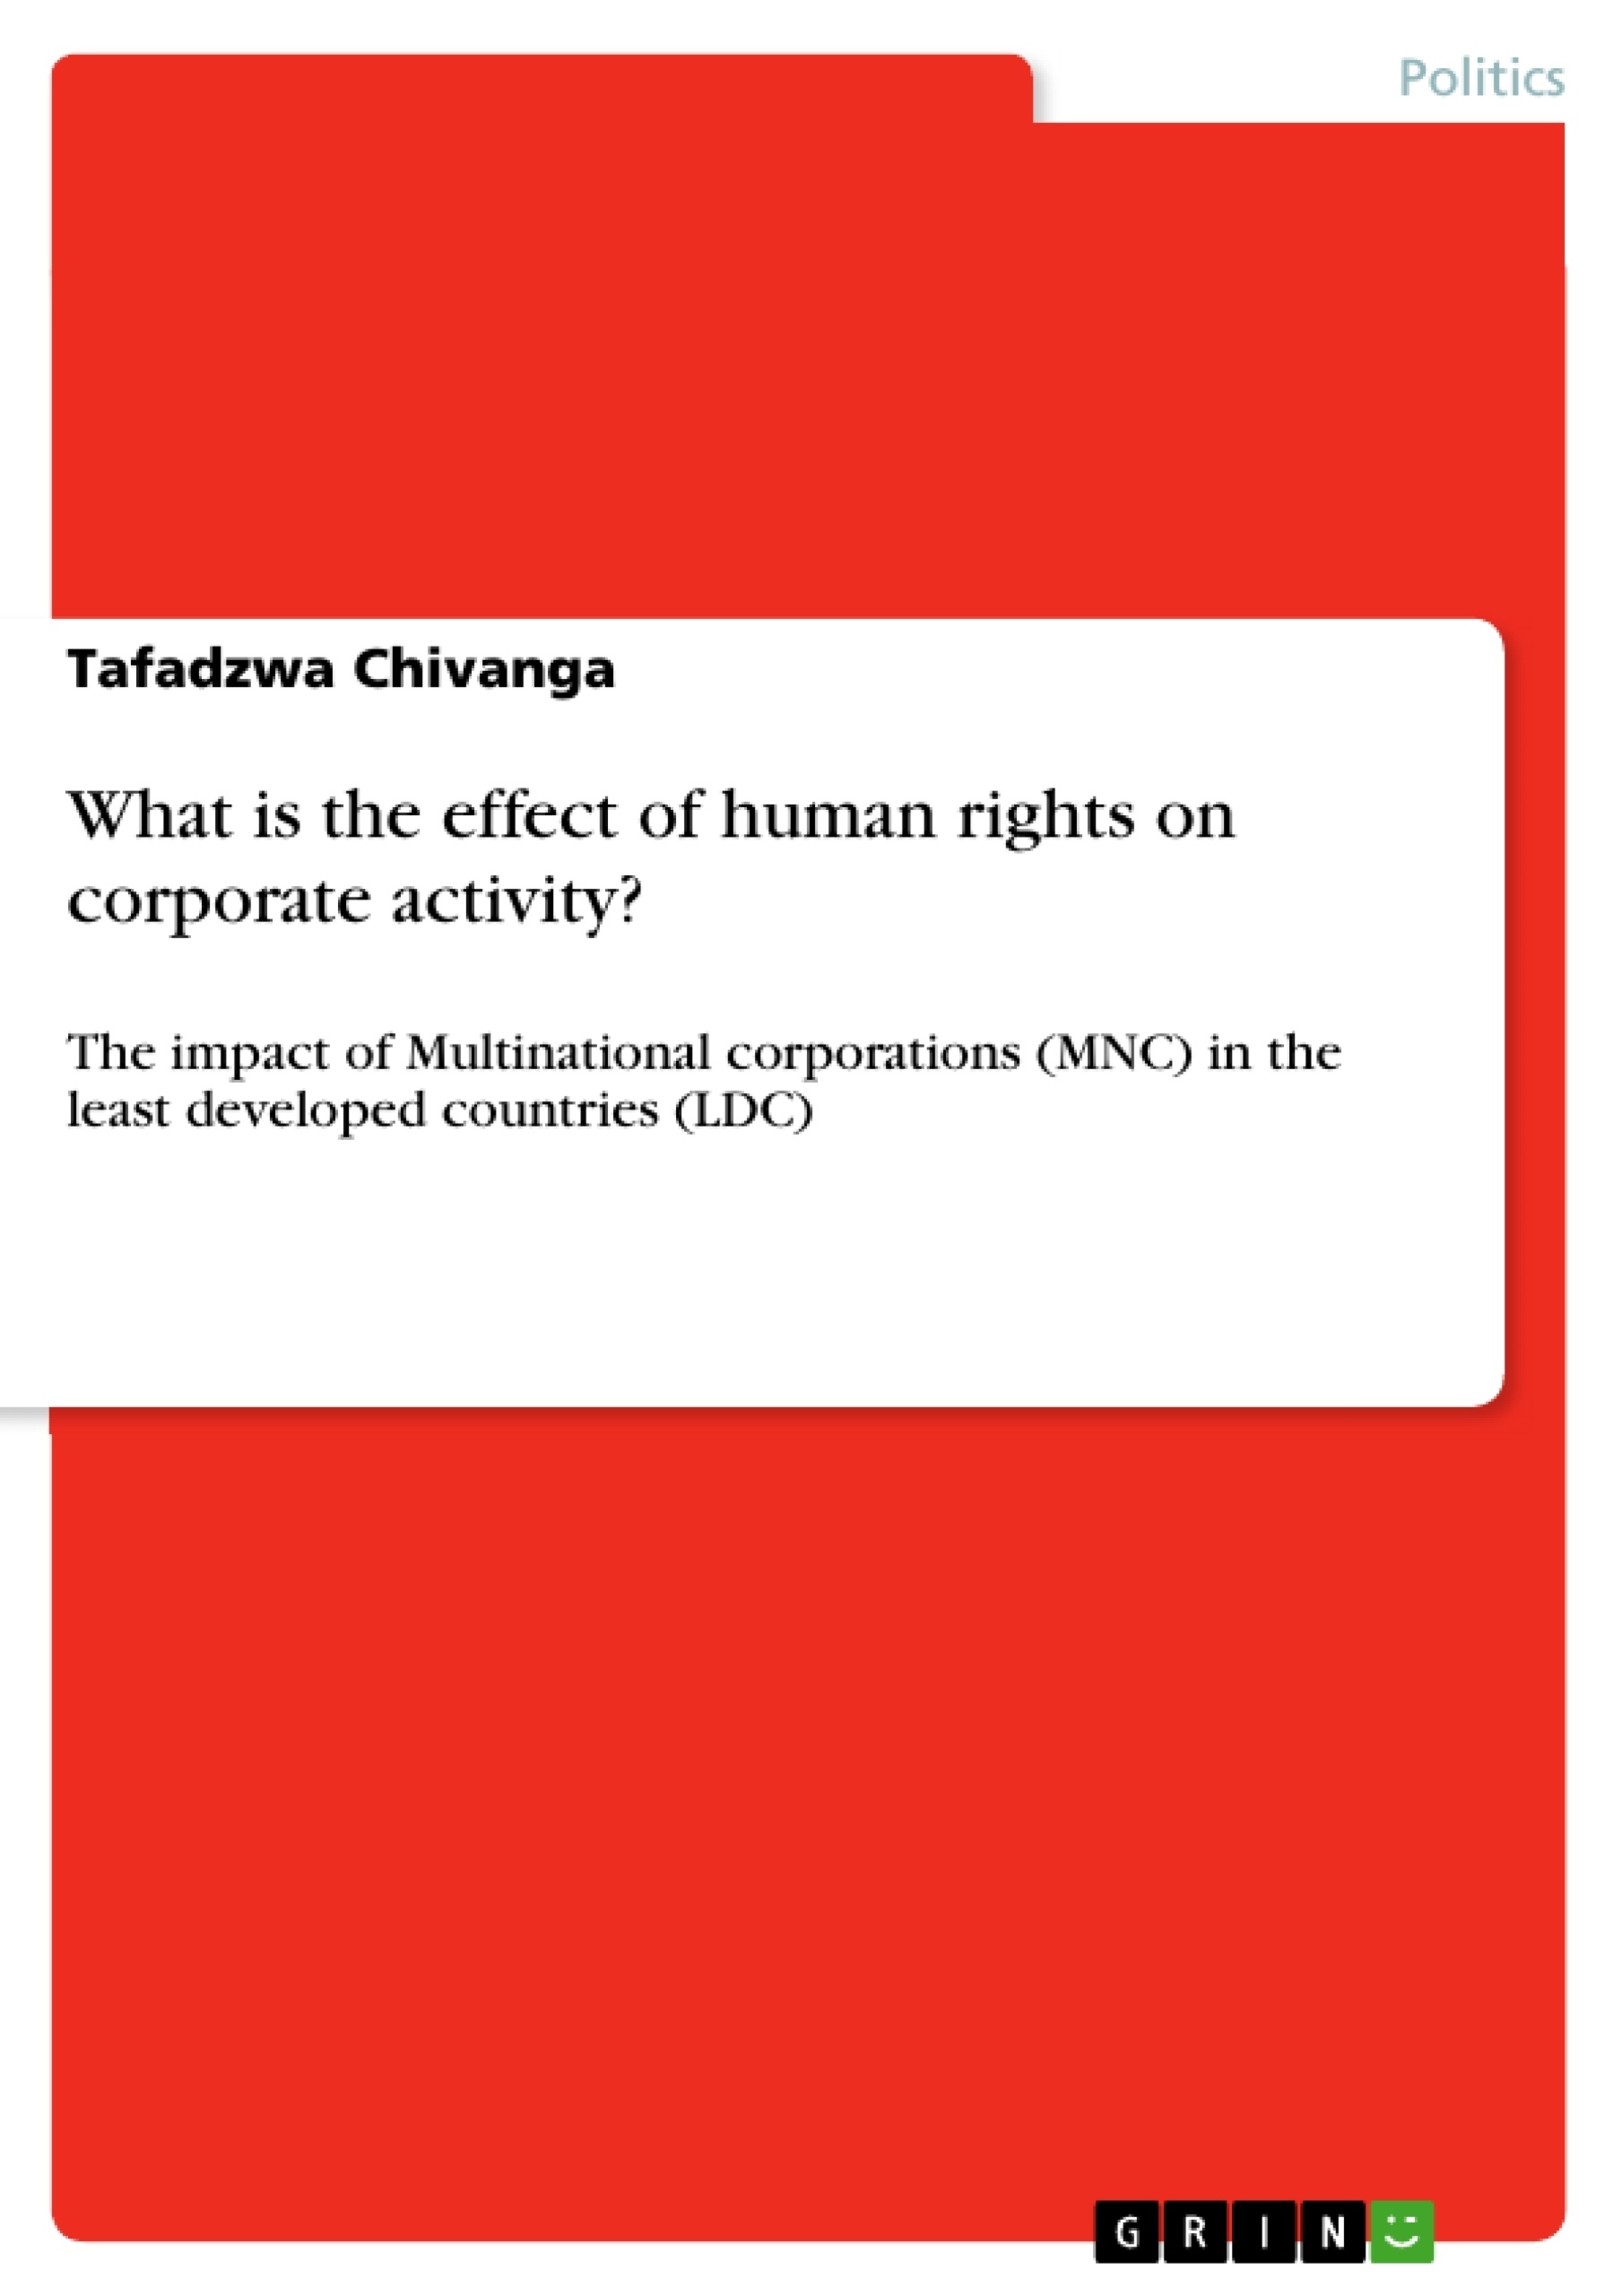 Título: What is the effect of human rights on corporate activity?